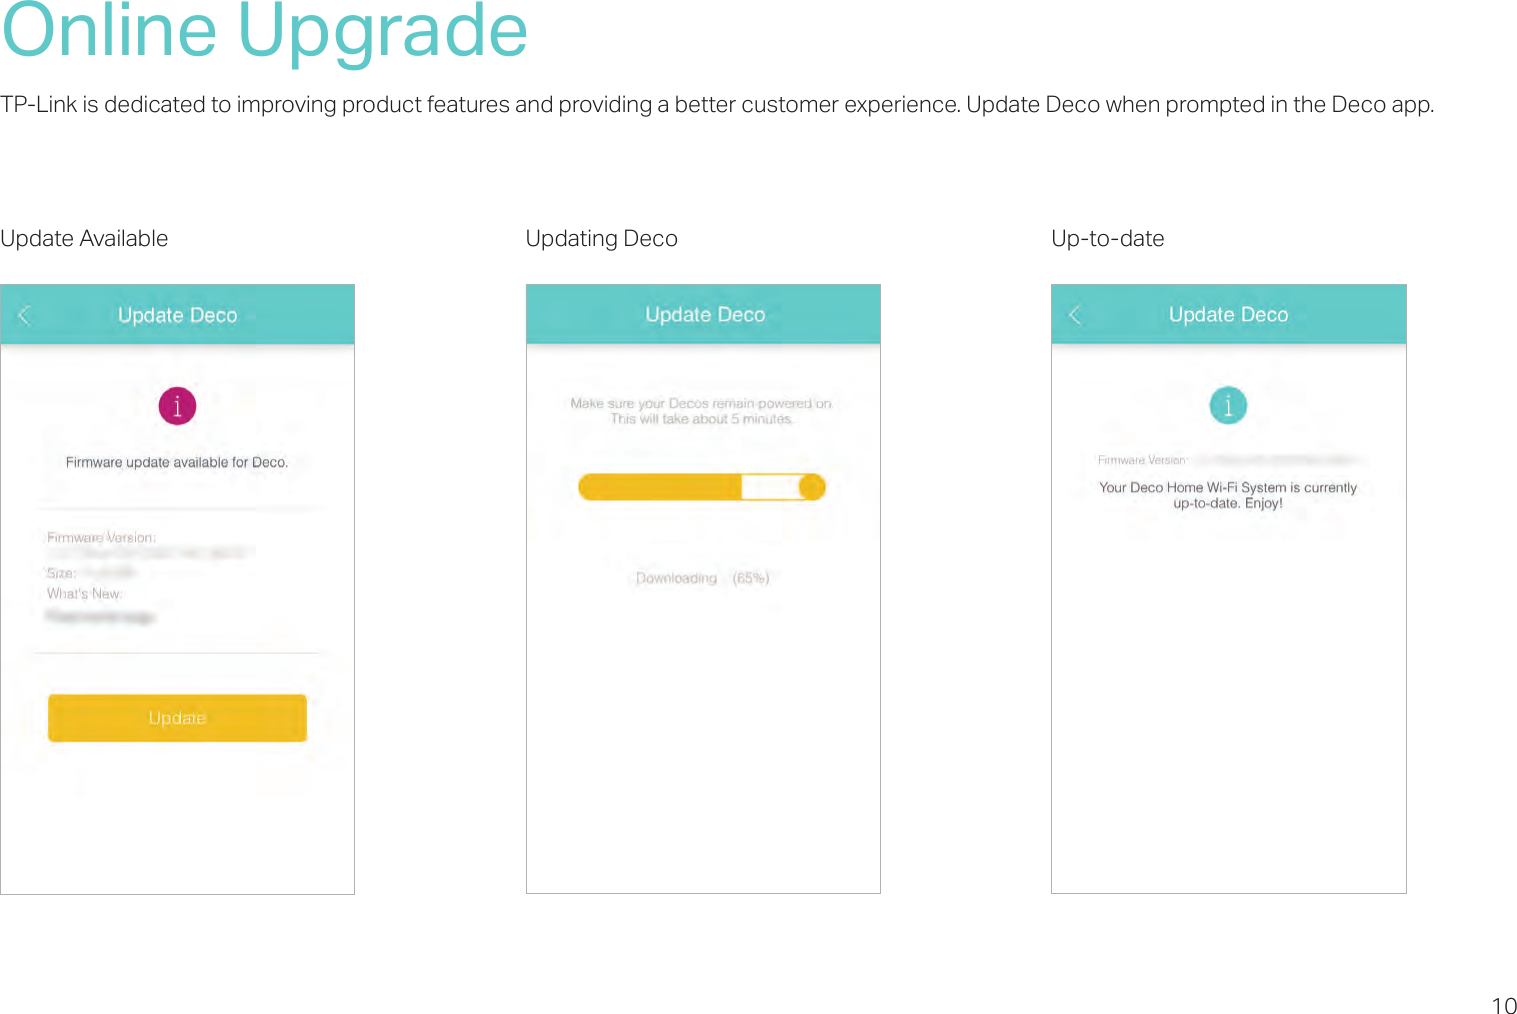 10Online UpgradeTP-Link is dedicated to improving product features and providing a better customer experience. Update Deco when prompted in the Deco app.Update Available Updating Deco Up-to-date